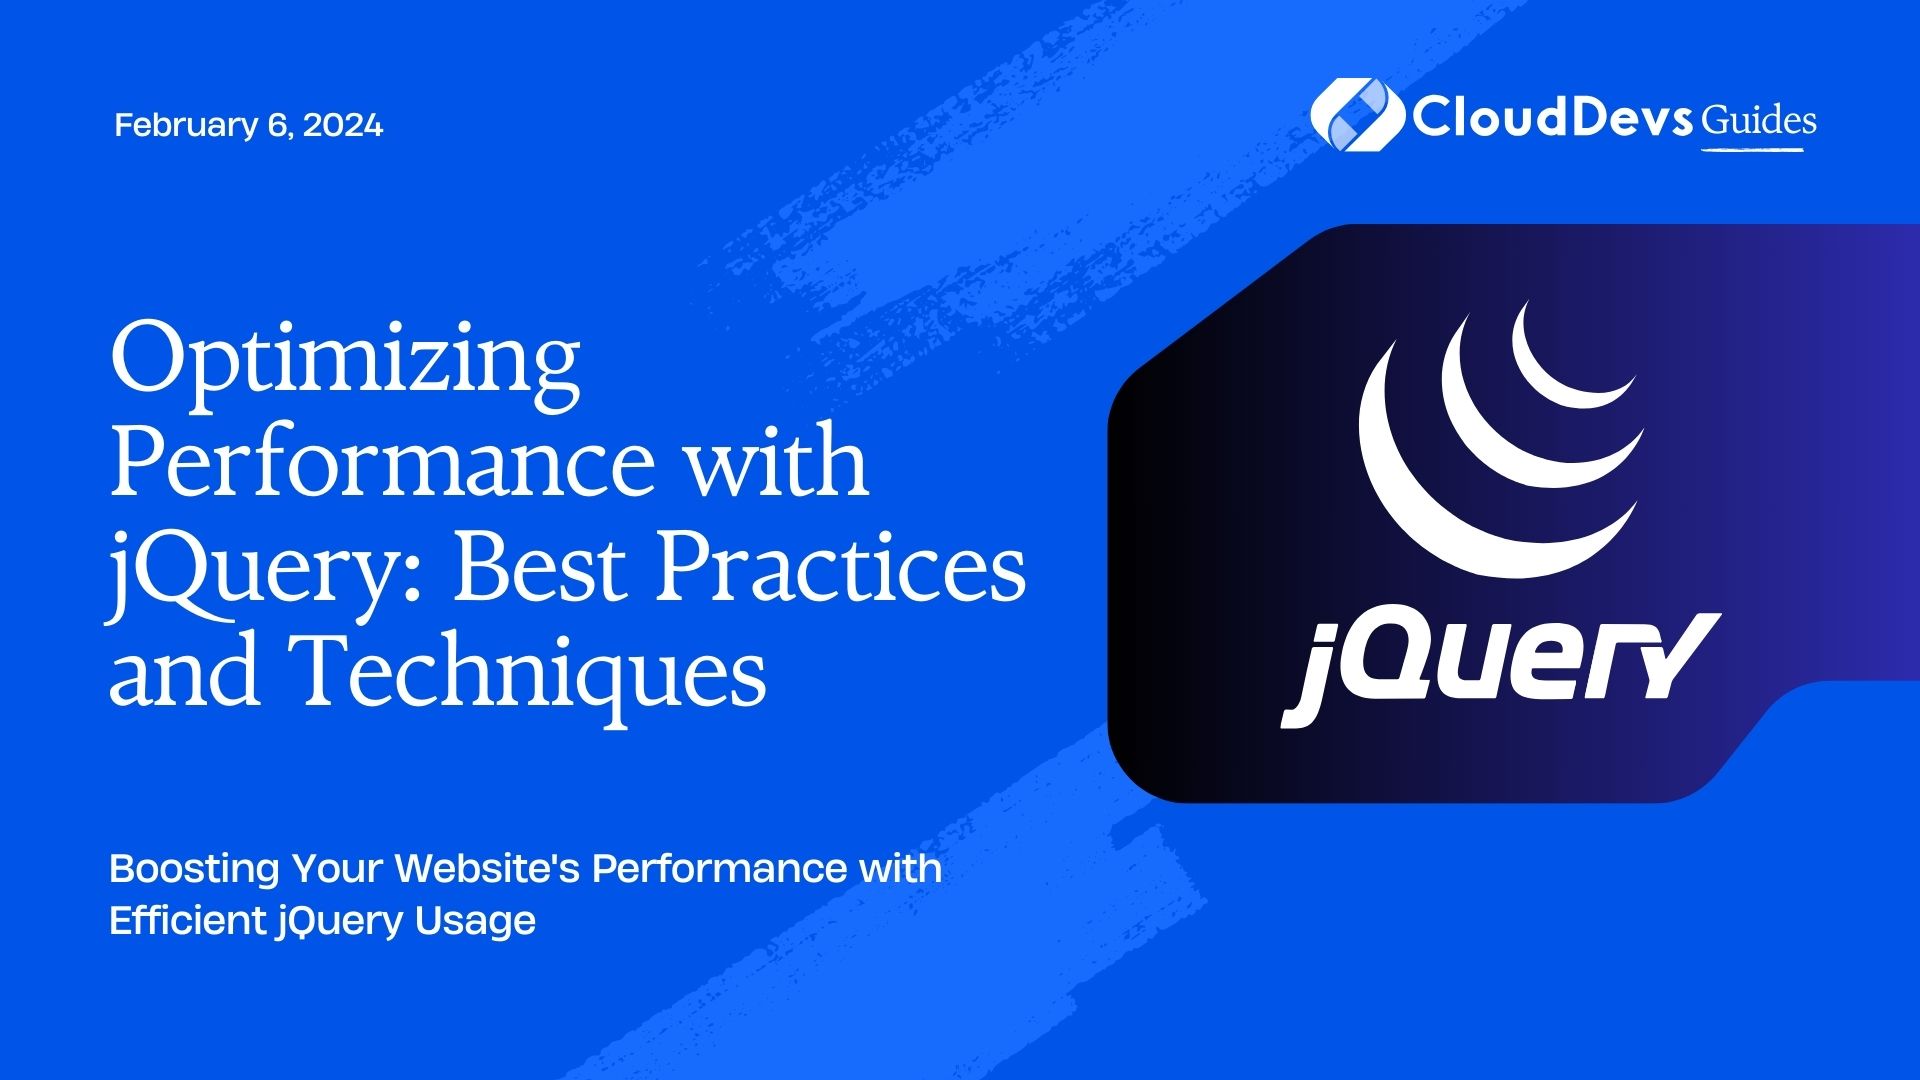 Optimizing Performance with jQuery: Best Practices and Techniques